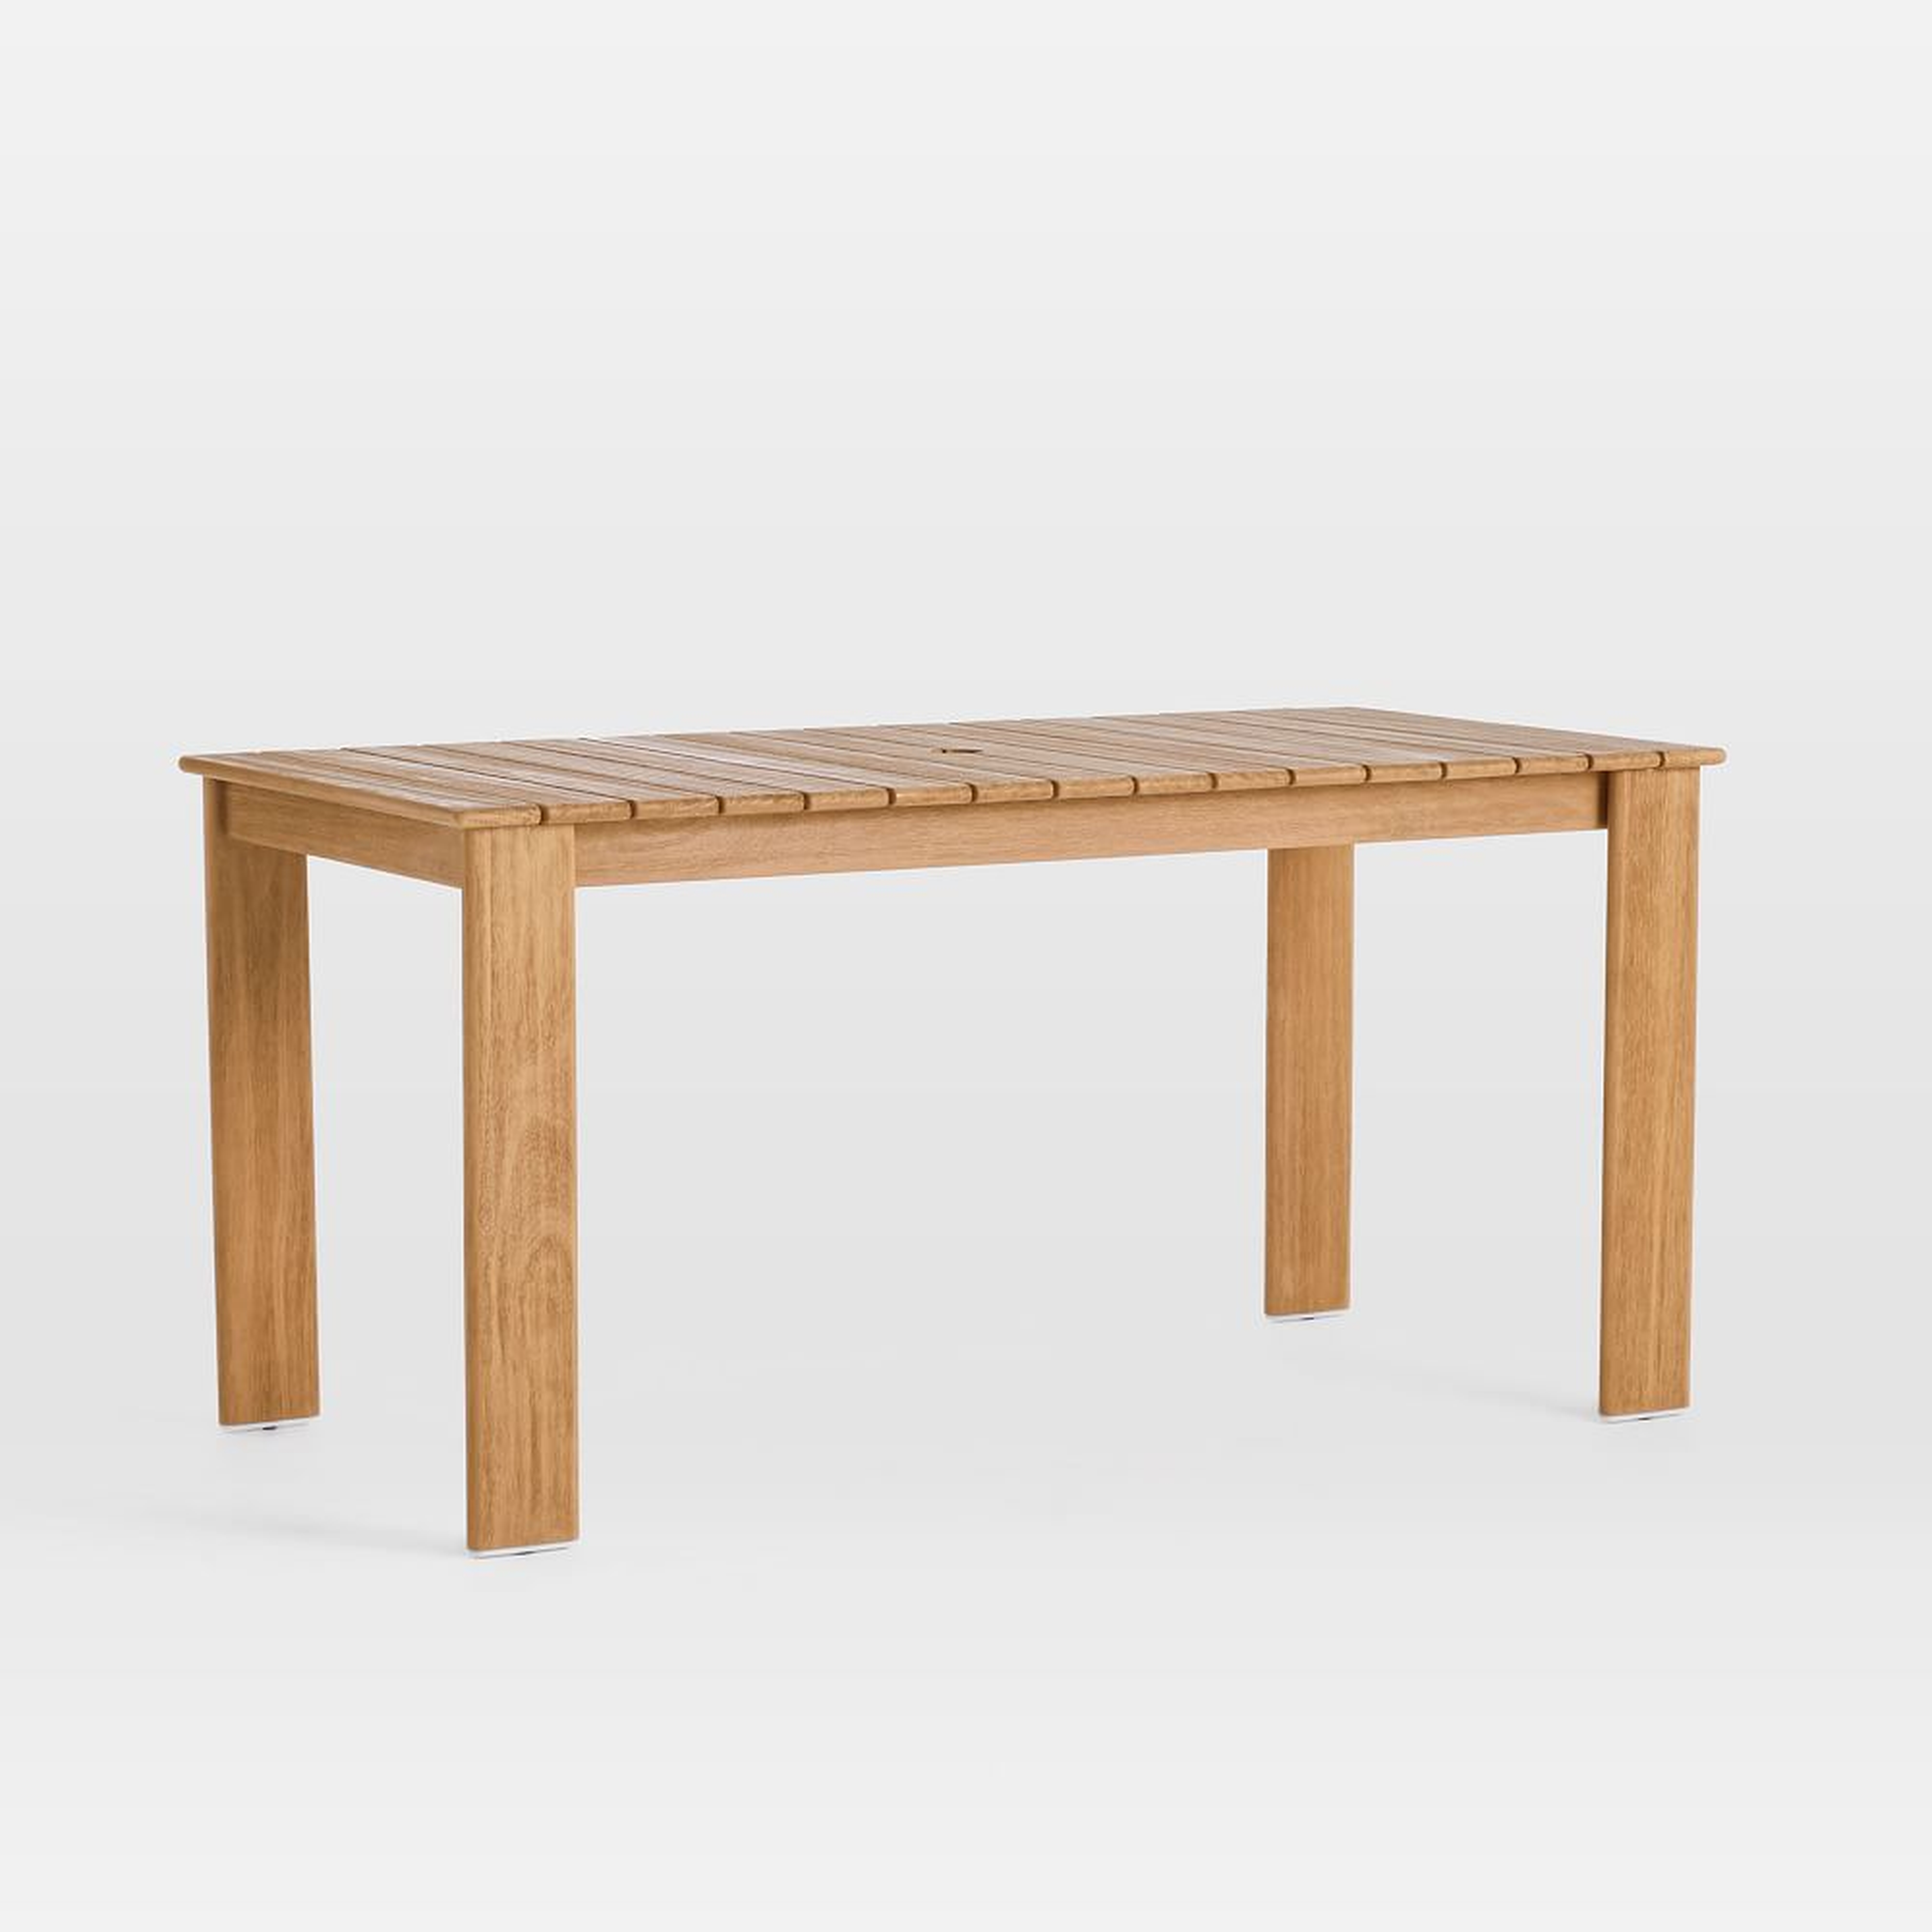 Playa Outdoor Dining Table - West Elm